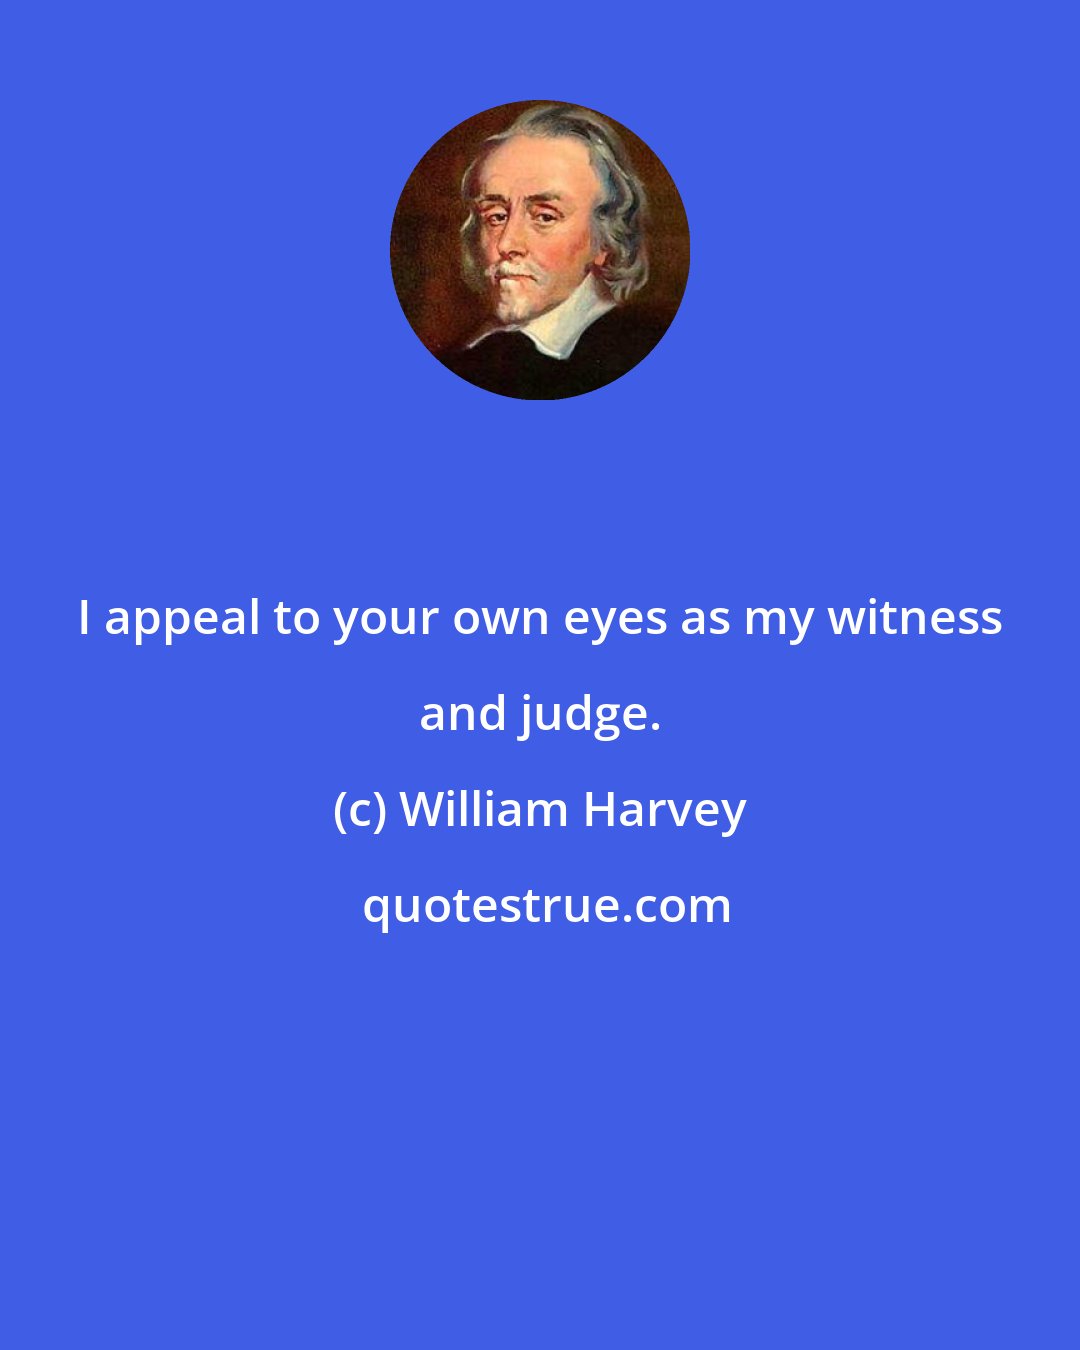 William Harvey: I appeal to your own eyes as my witness and judge.